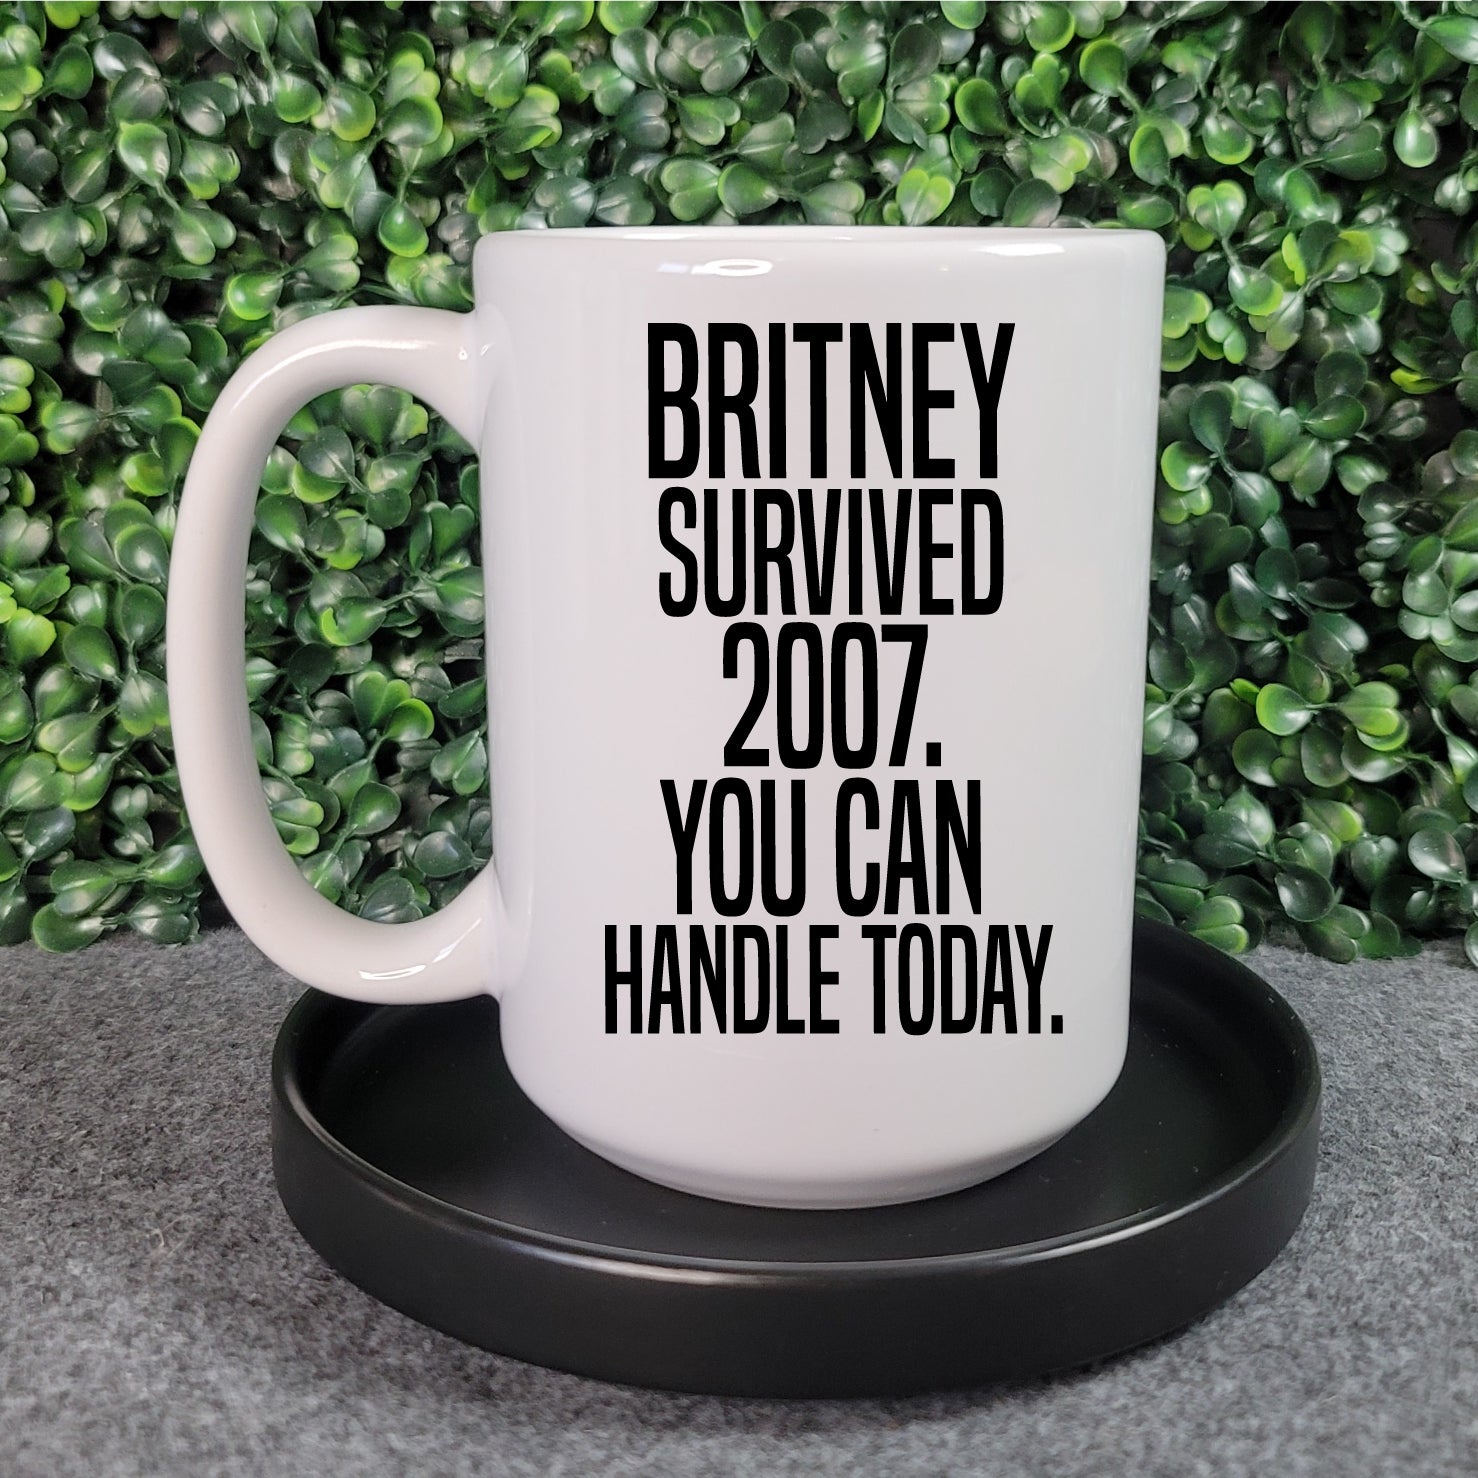 Britney Survived 2007. You Can Handle Today Mug - Republic West